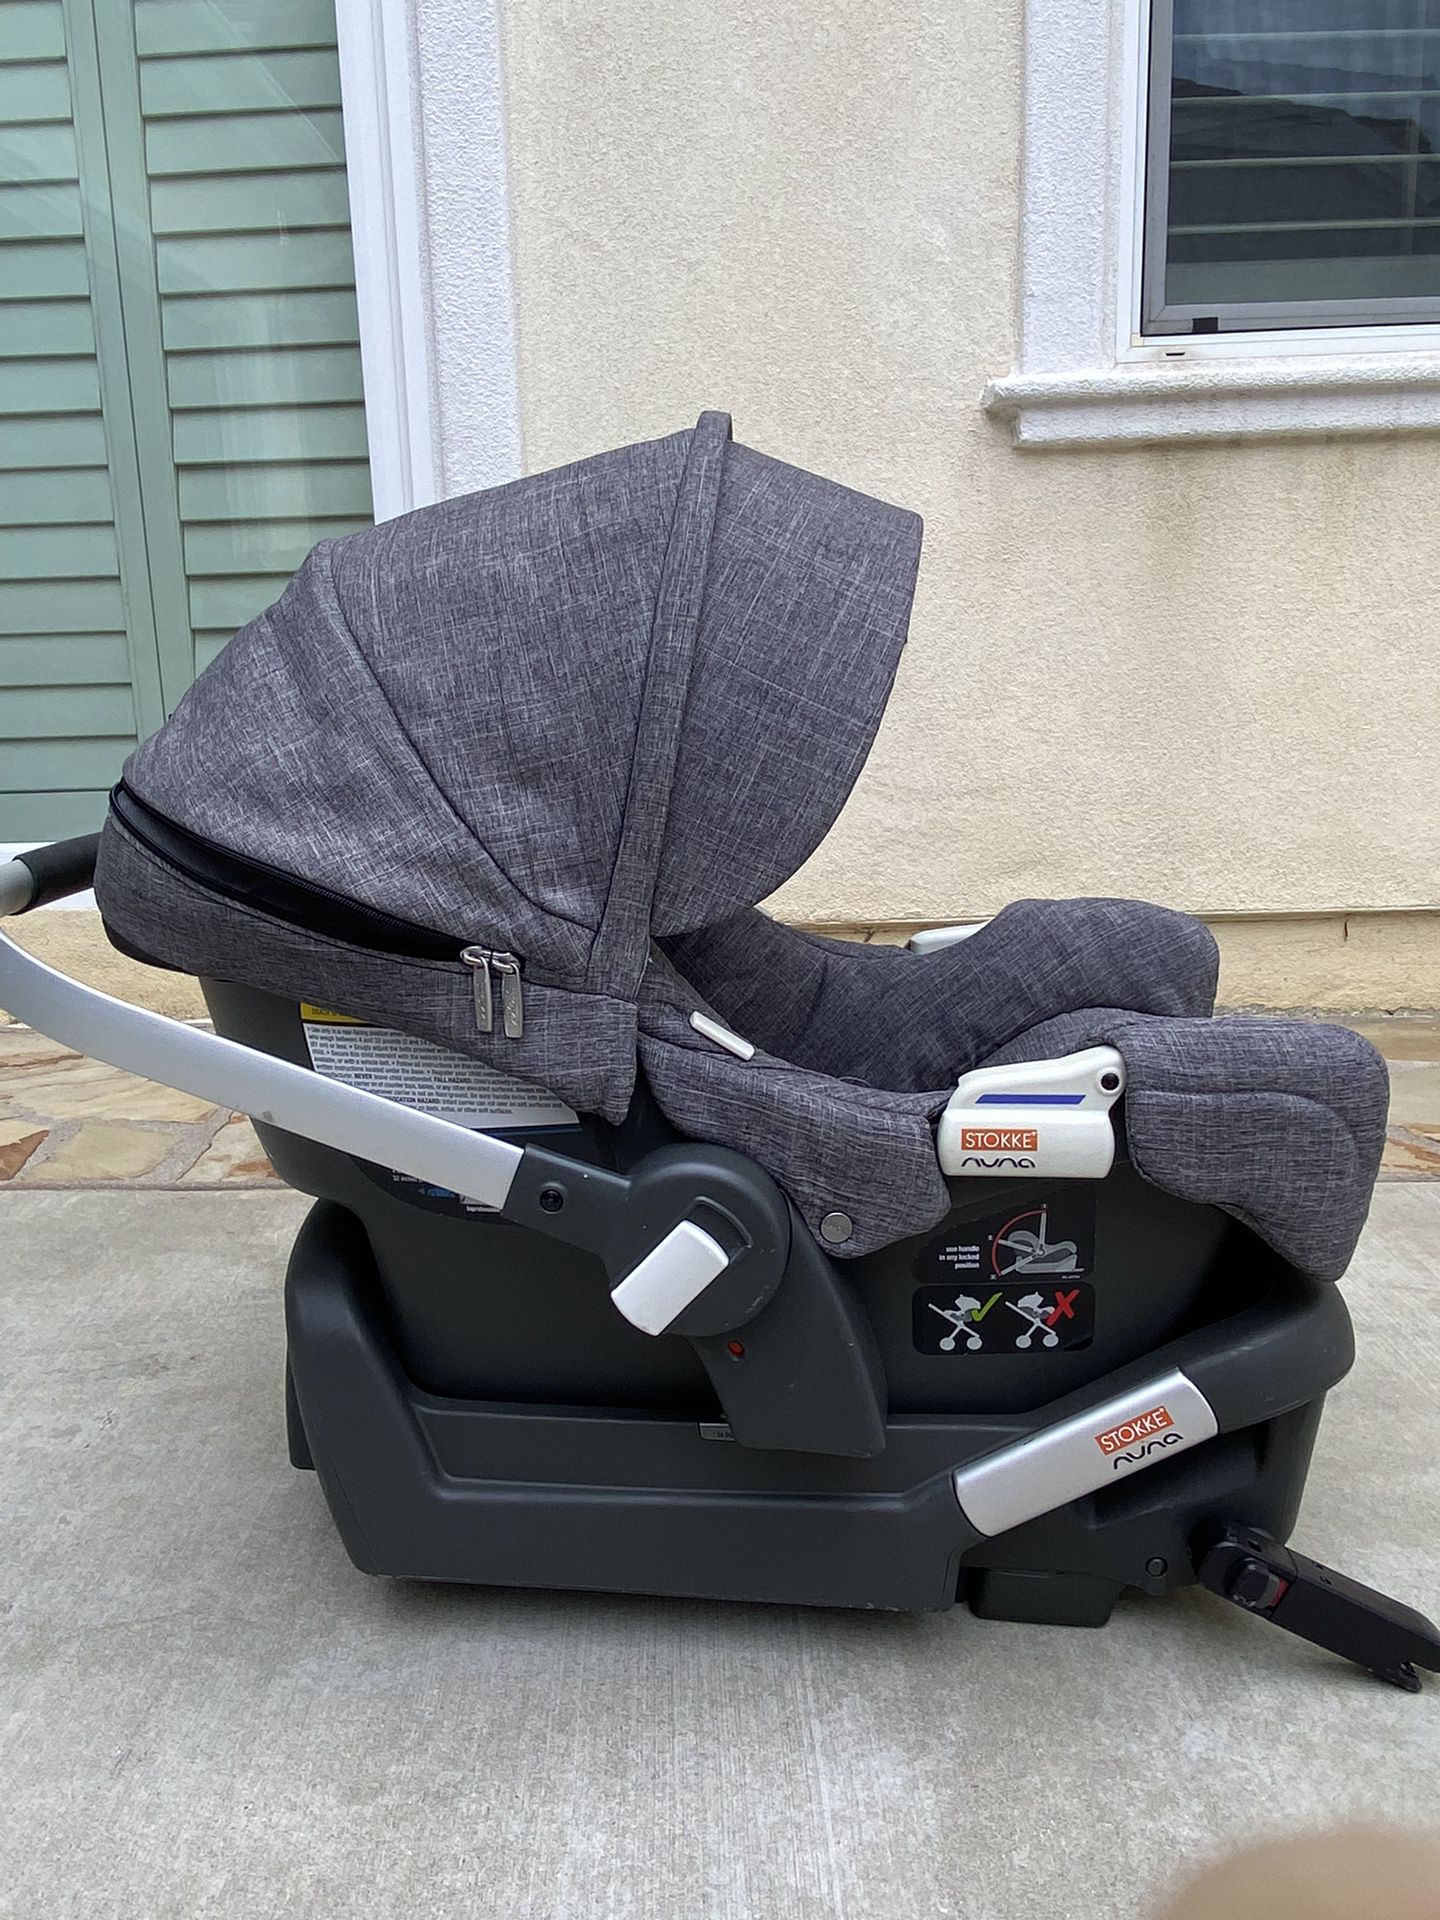 Free Expired Stokke Nuna Infant Car Seat For Parts